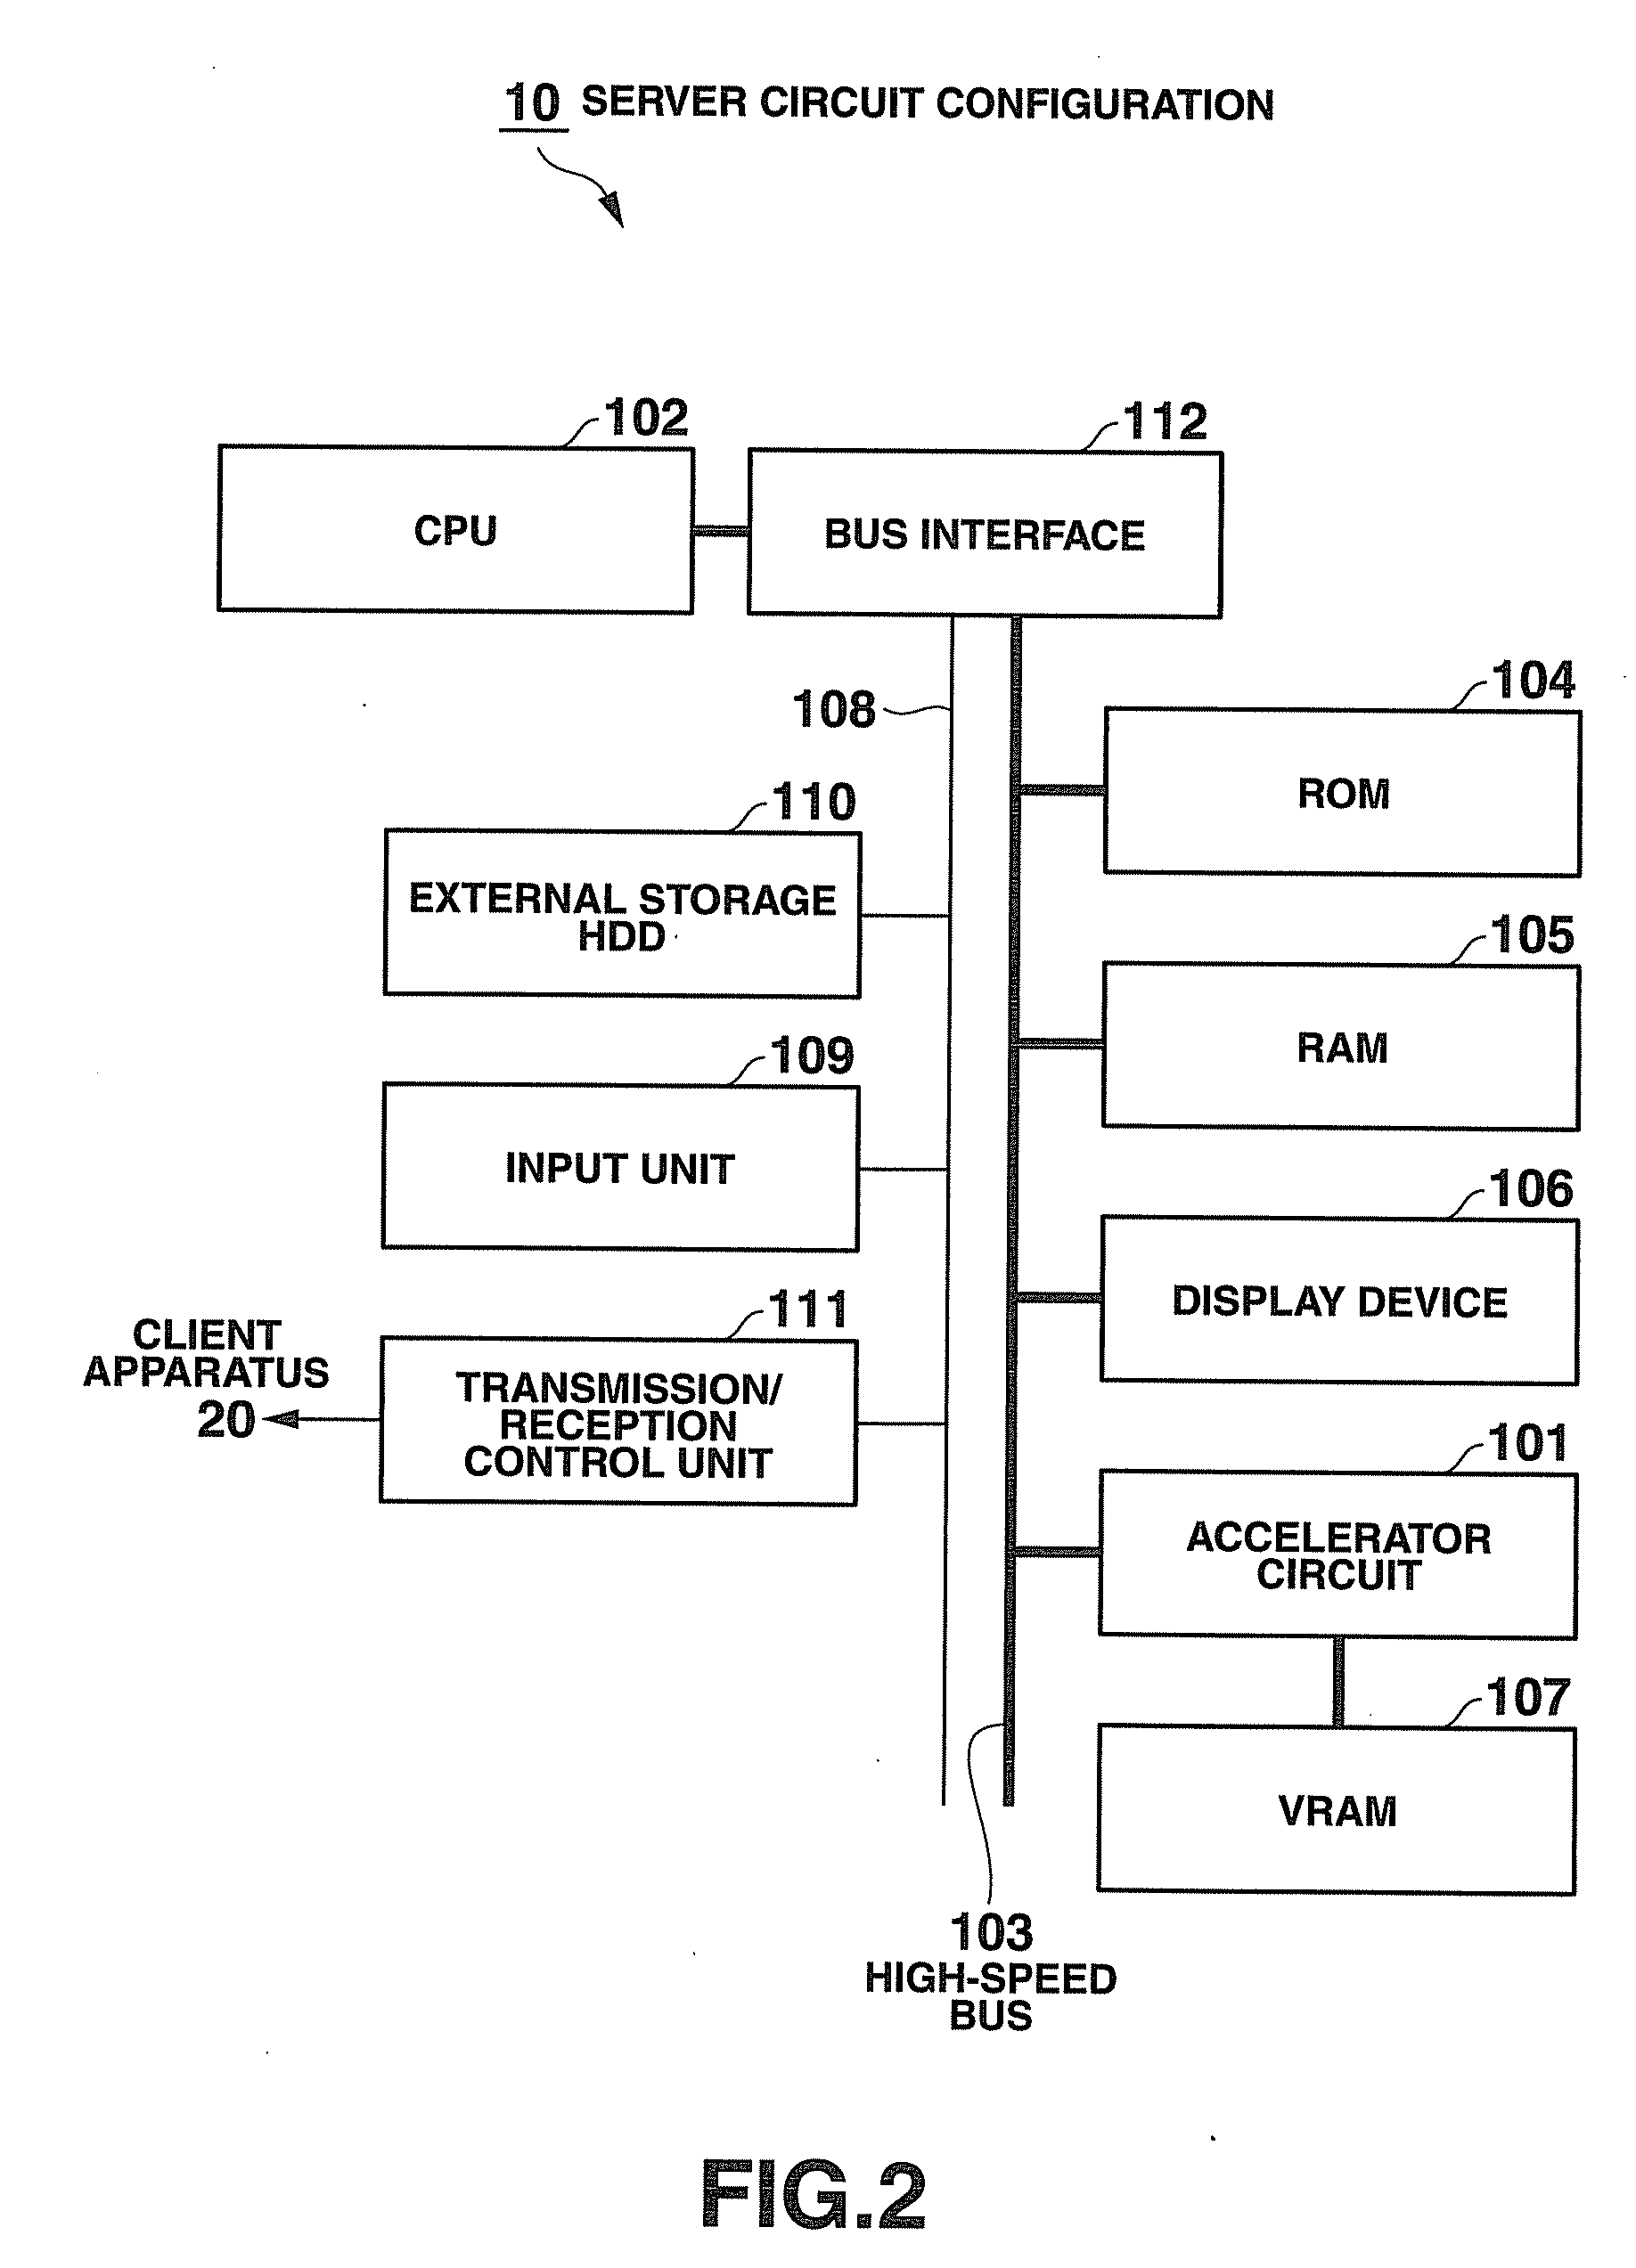 Server apparatus of computer system